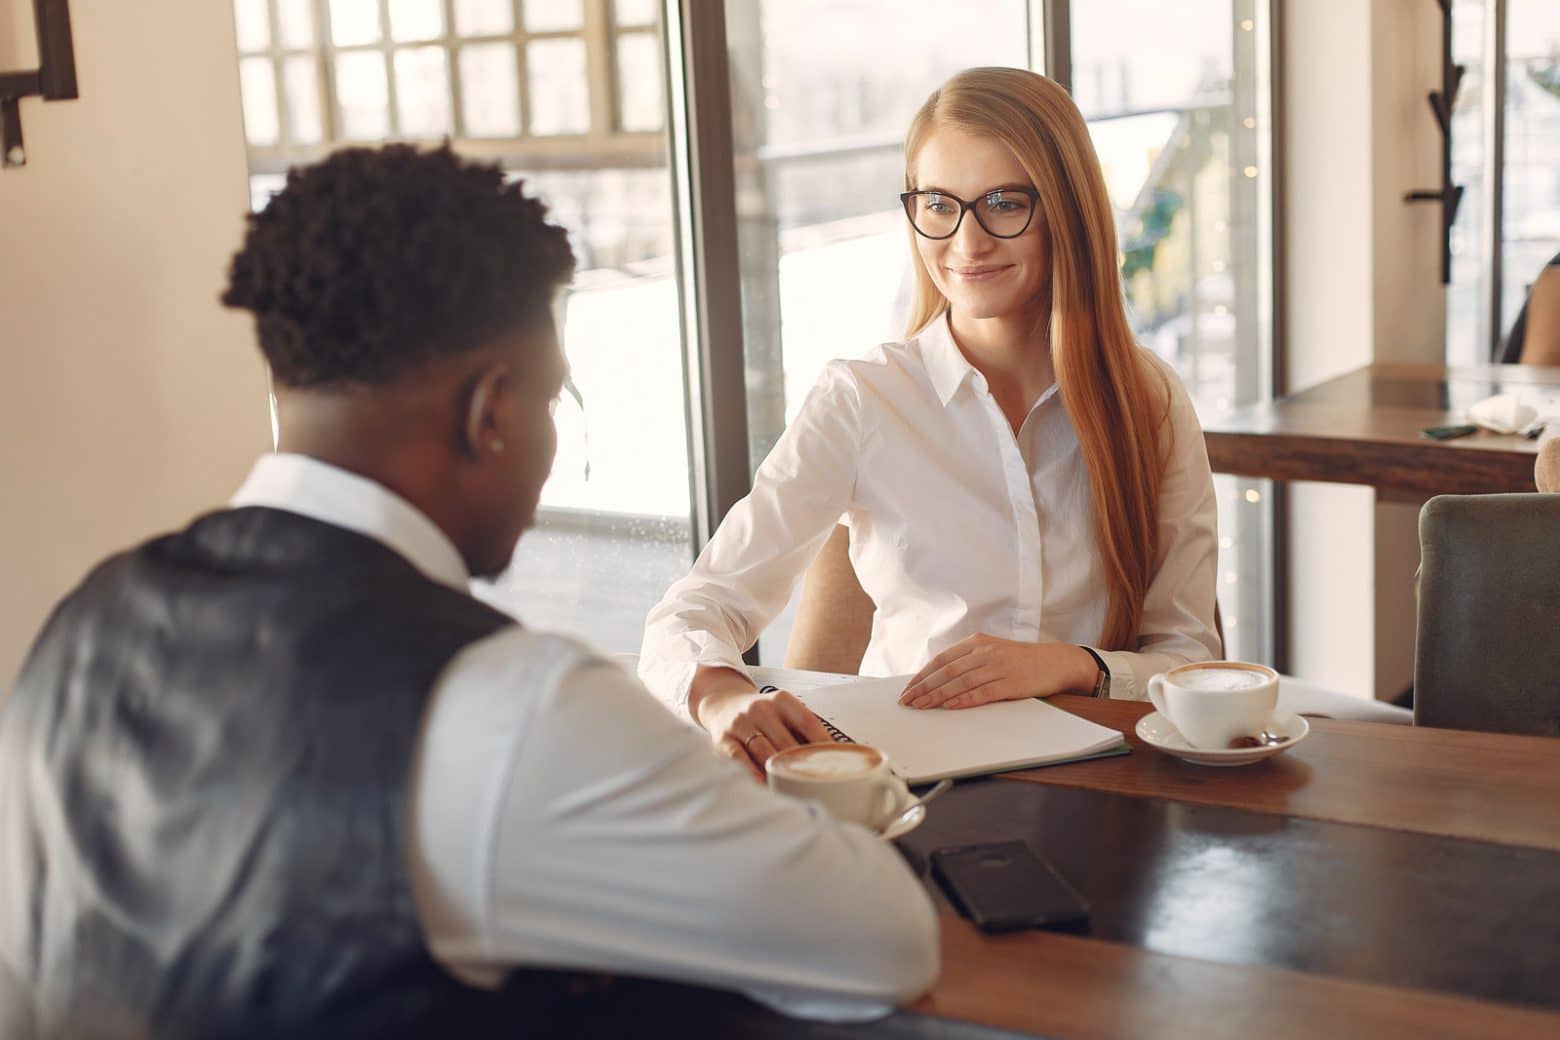 10 common interview questions and answers in South Africa